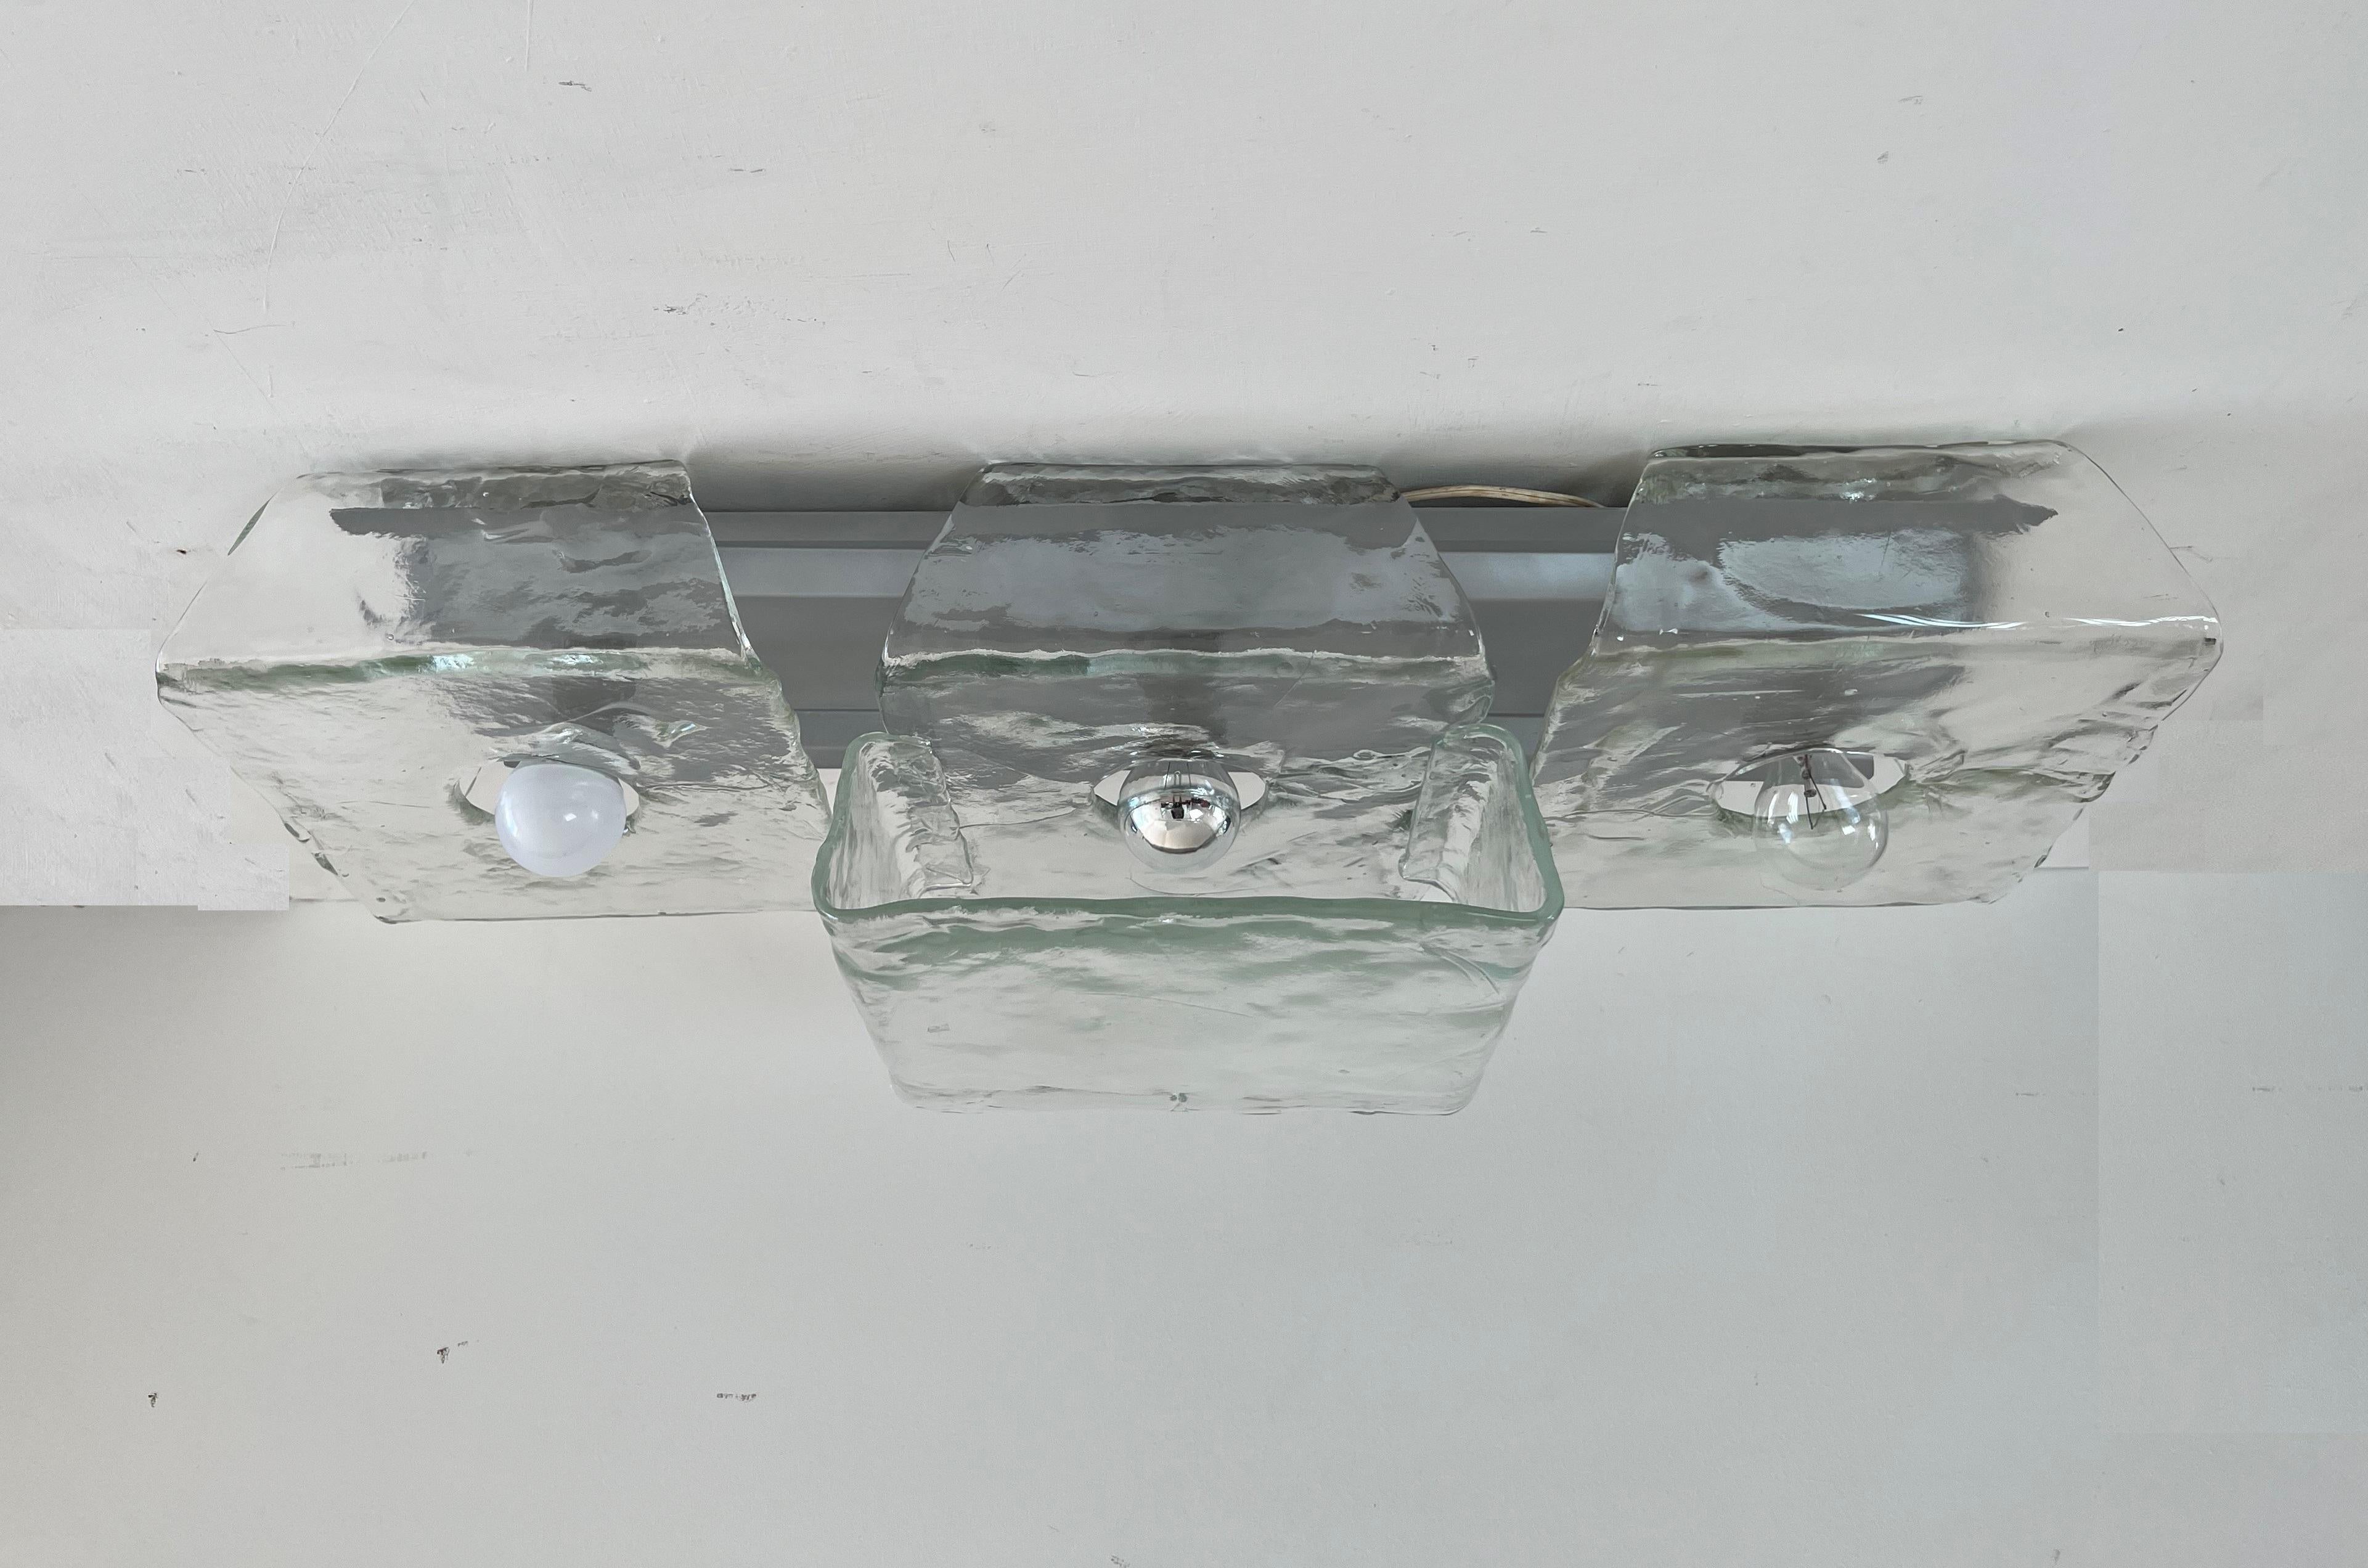 Two Mid-Century Modern flushmounts lamp by Mazzega, most likely designed by Carlo Nason, circa 1970, consisting on 4 clear murano glass pieces that slide into a grey/silver lacquered base ( this can be changed to white or any desired color to math